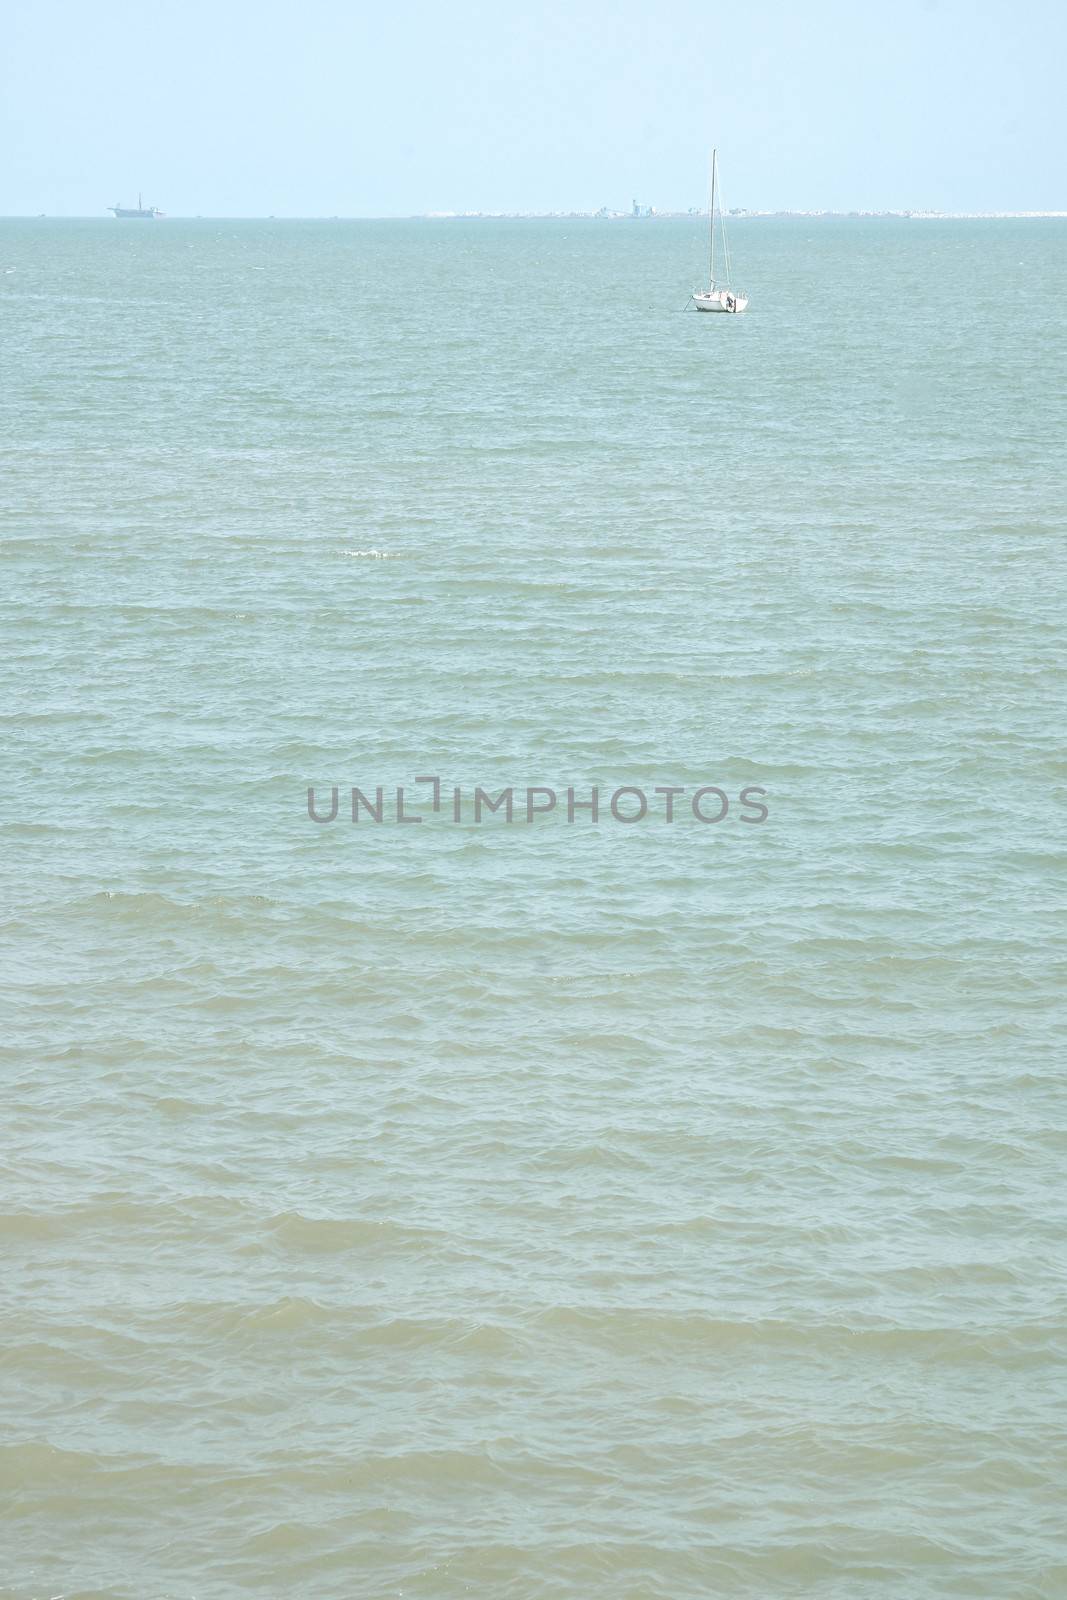 Sea, sky background image by xfdly5